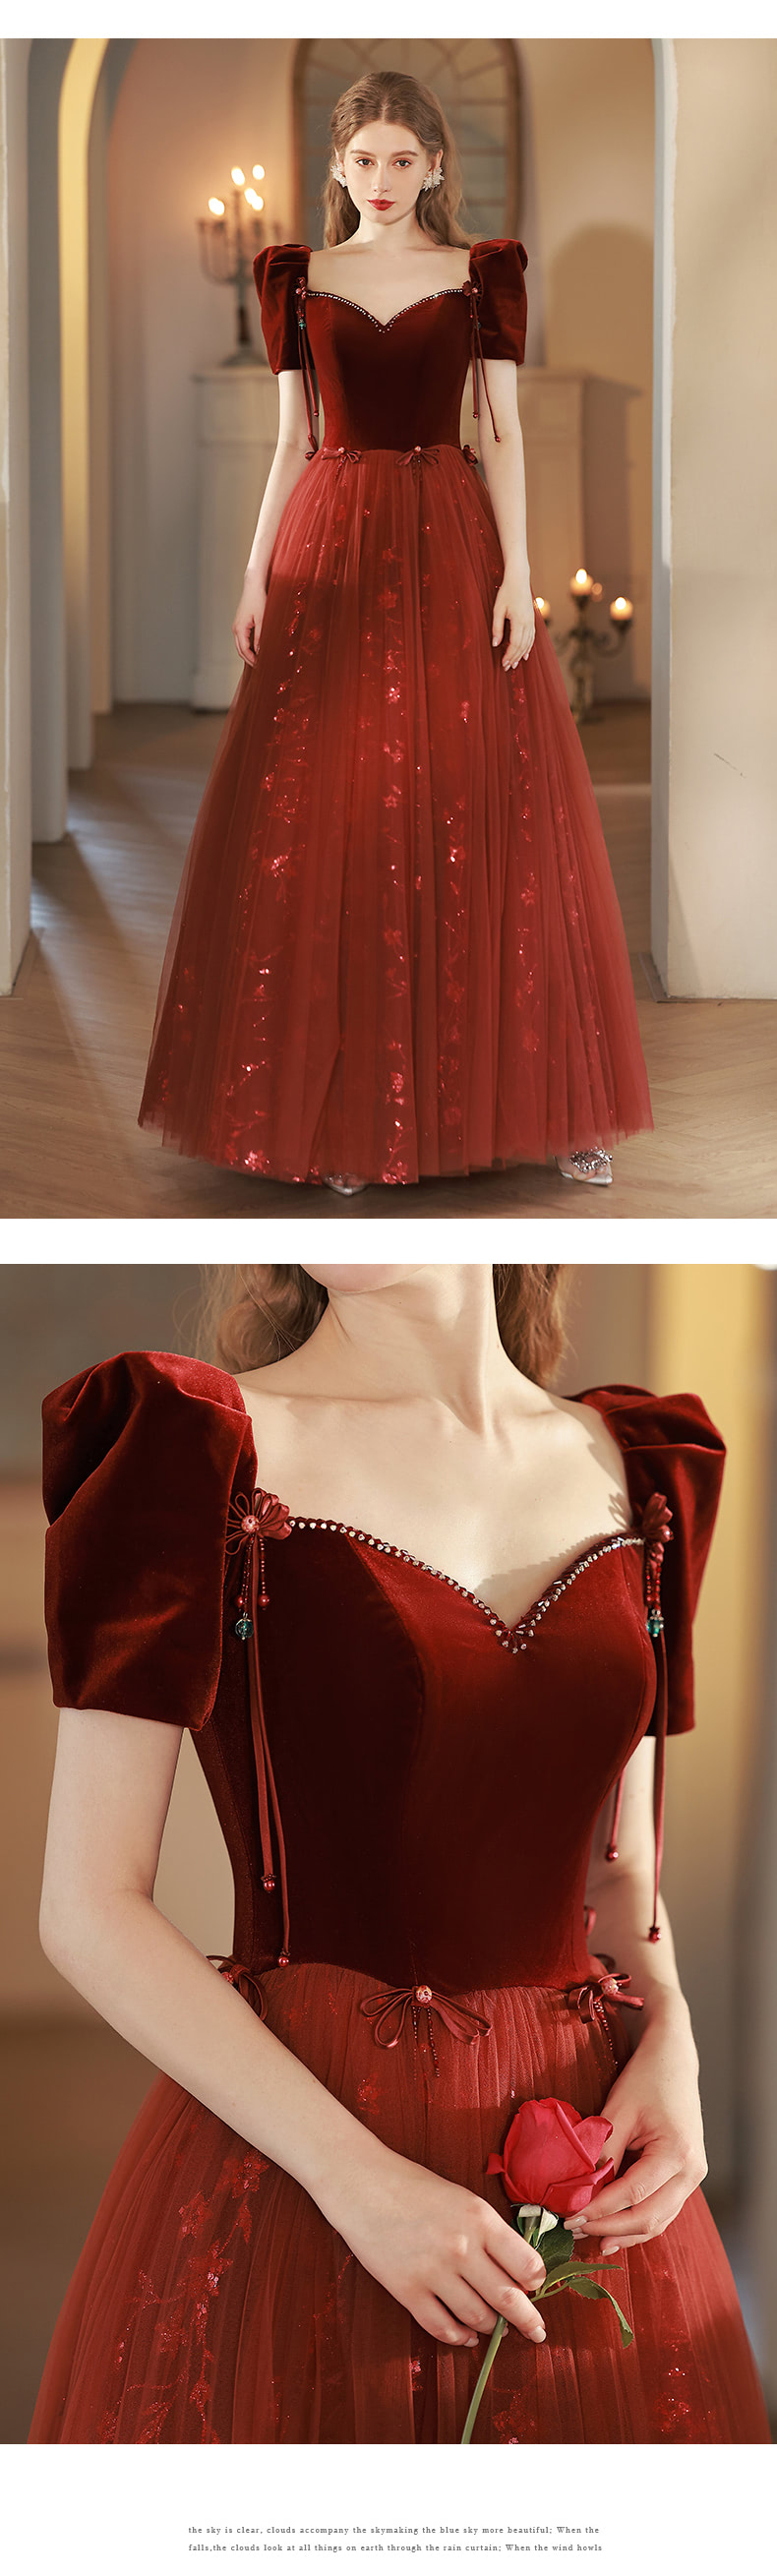 Vintage-Velvet-Embroidery-Evening-Party-Banquet-Long-Prom-Dress12.jpg